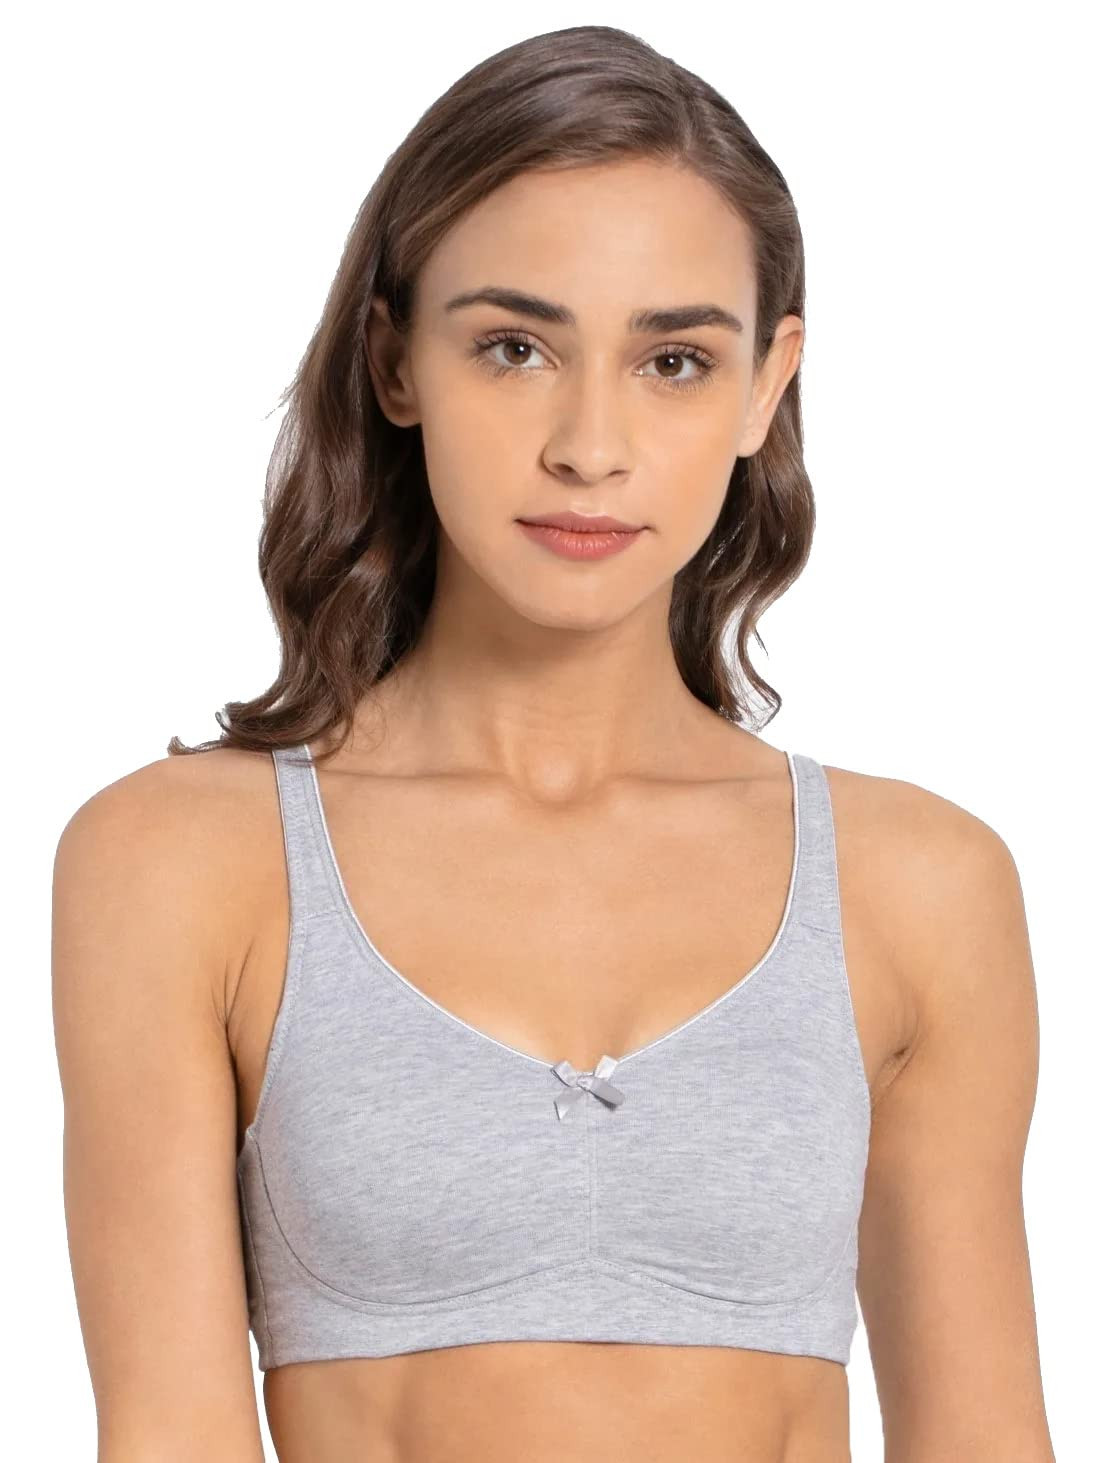 https://www.fastemi.com/uploads/fastemicom/products/enamor-non-wired-racerback-straps-lightly-padded-womenamp039s-every-day-bra-creased-36csize--36c-579712738131981_l.jpg